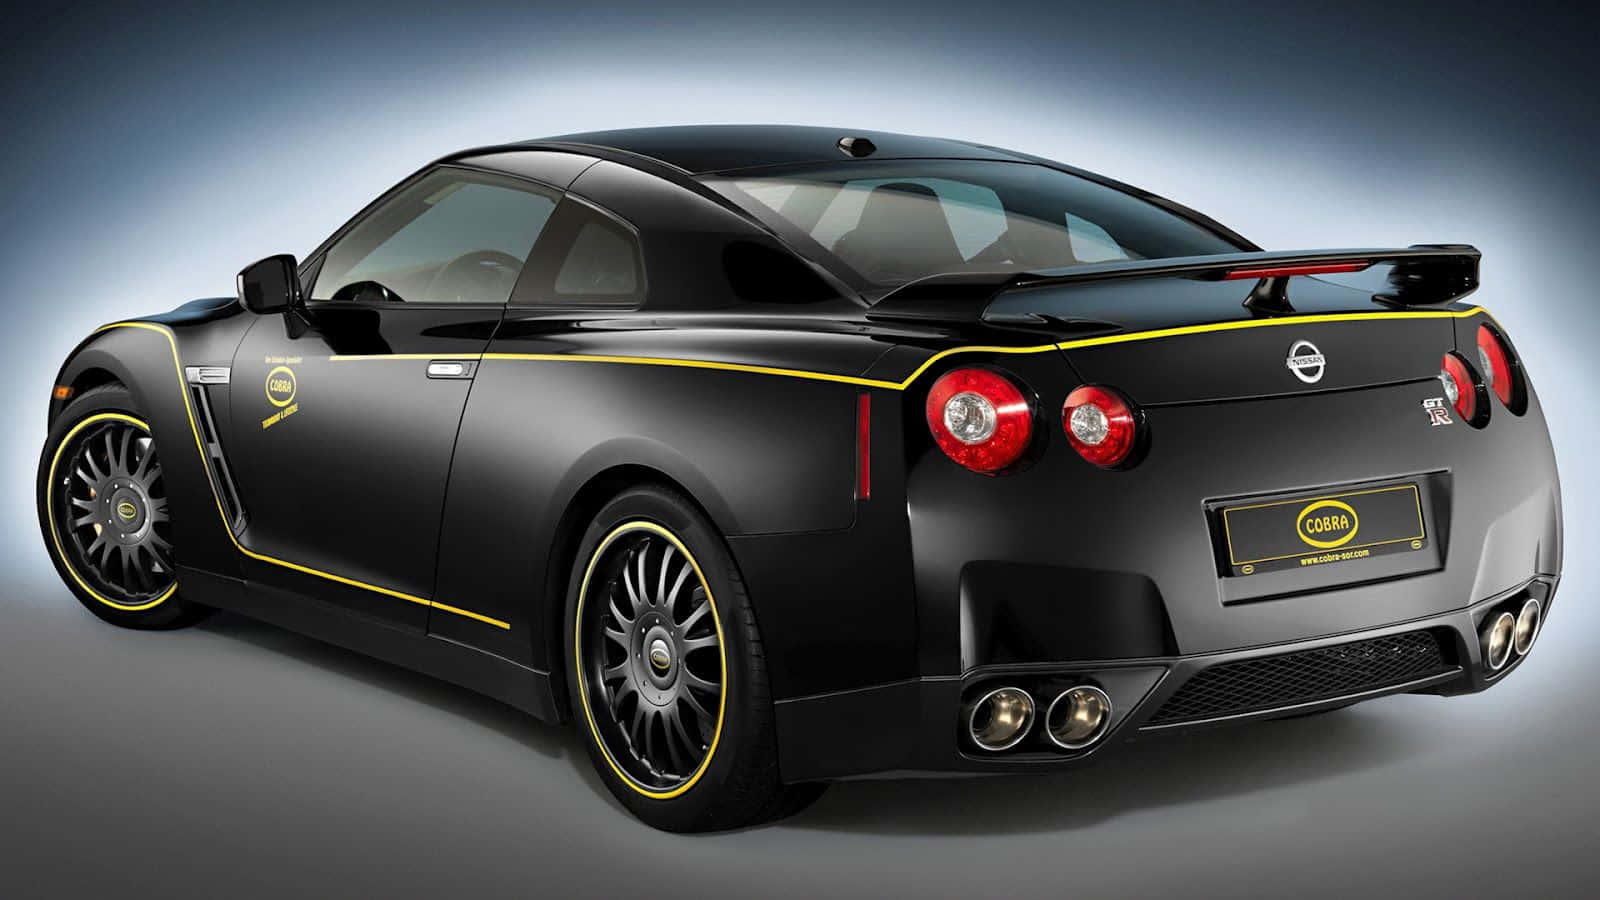 Put The Pedal To The Metal In The Stunning Cool Gtr Wallpaper